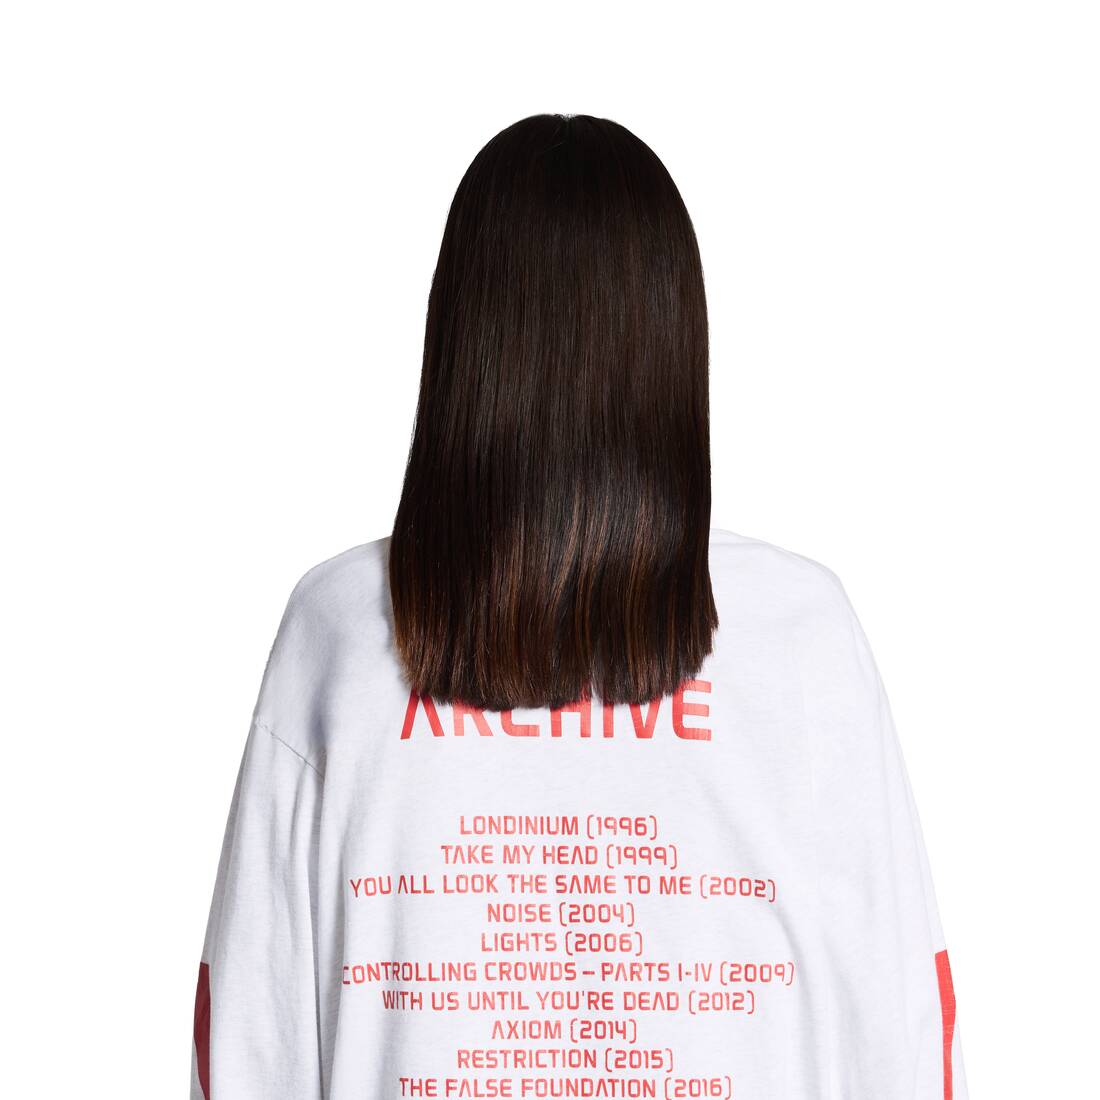 Balenciaga Music | Archive Series Connected Long Sleeve T-shirt Medium Fit  in Light Grey/red